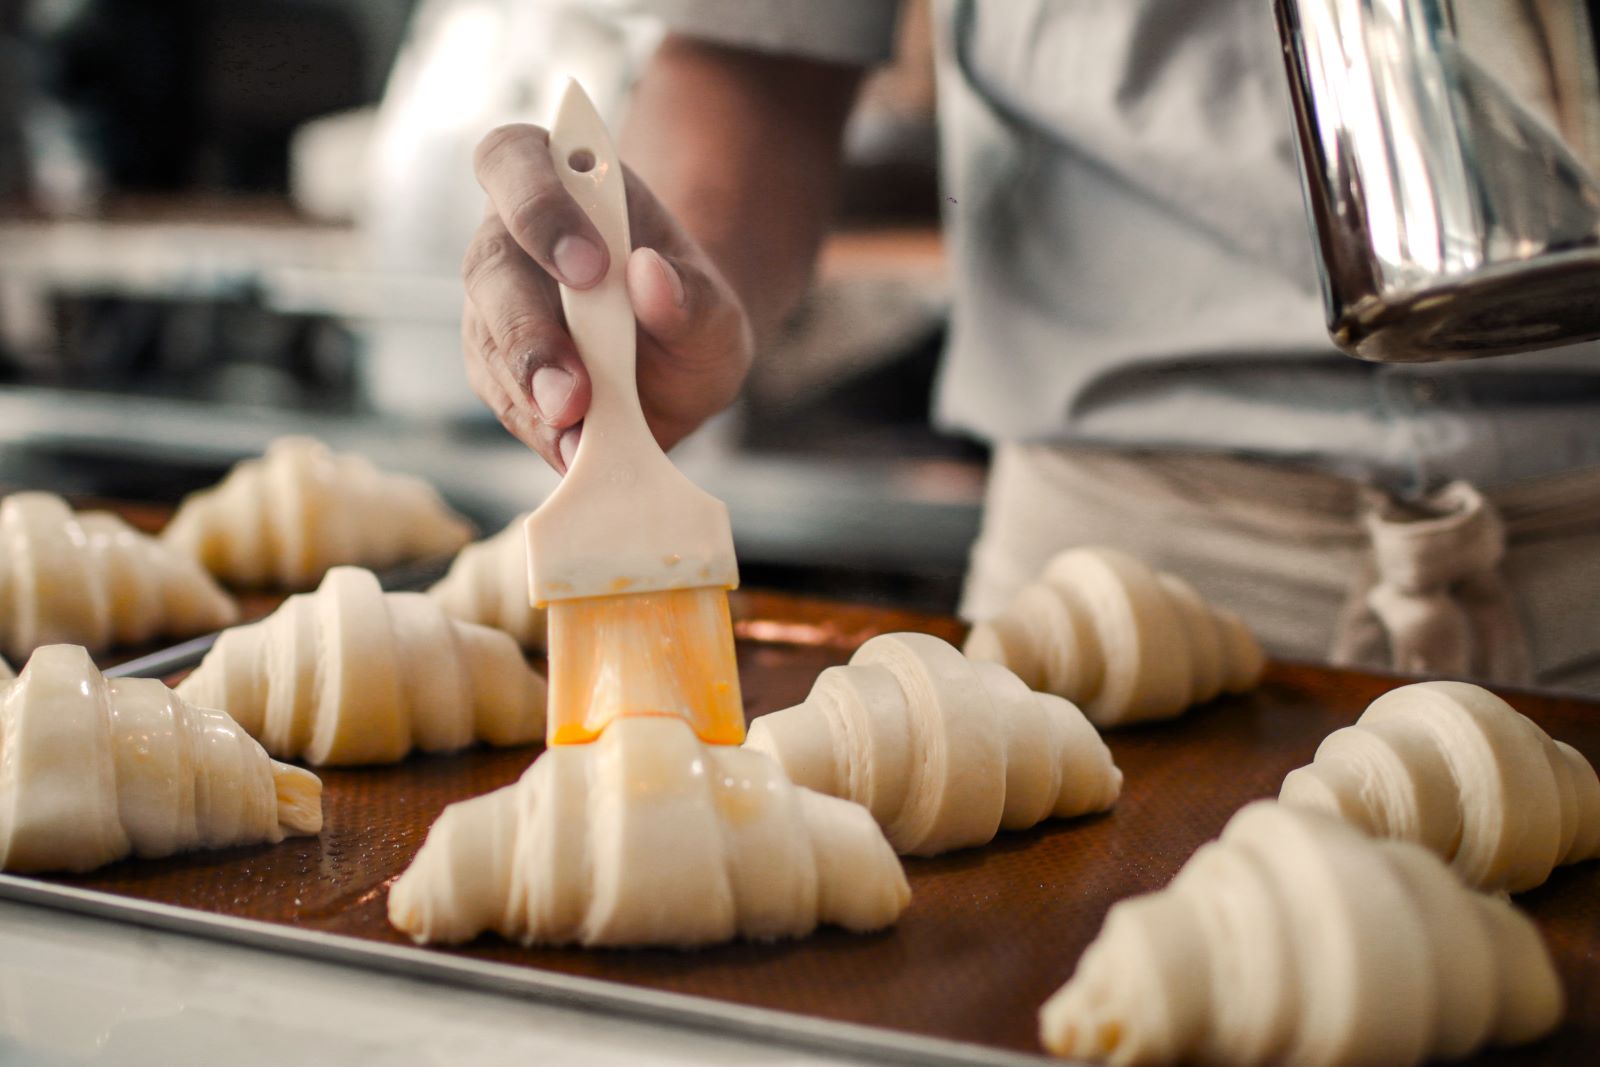 A pastry chef making croissants in France